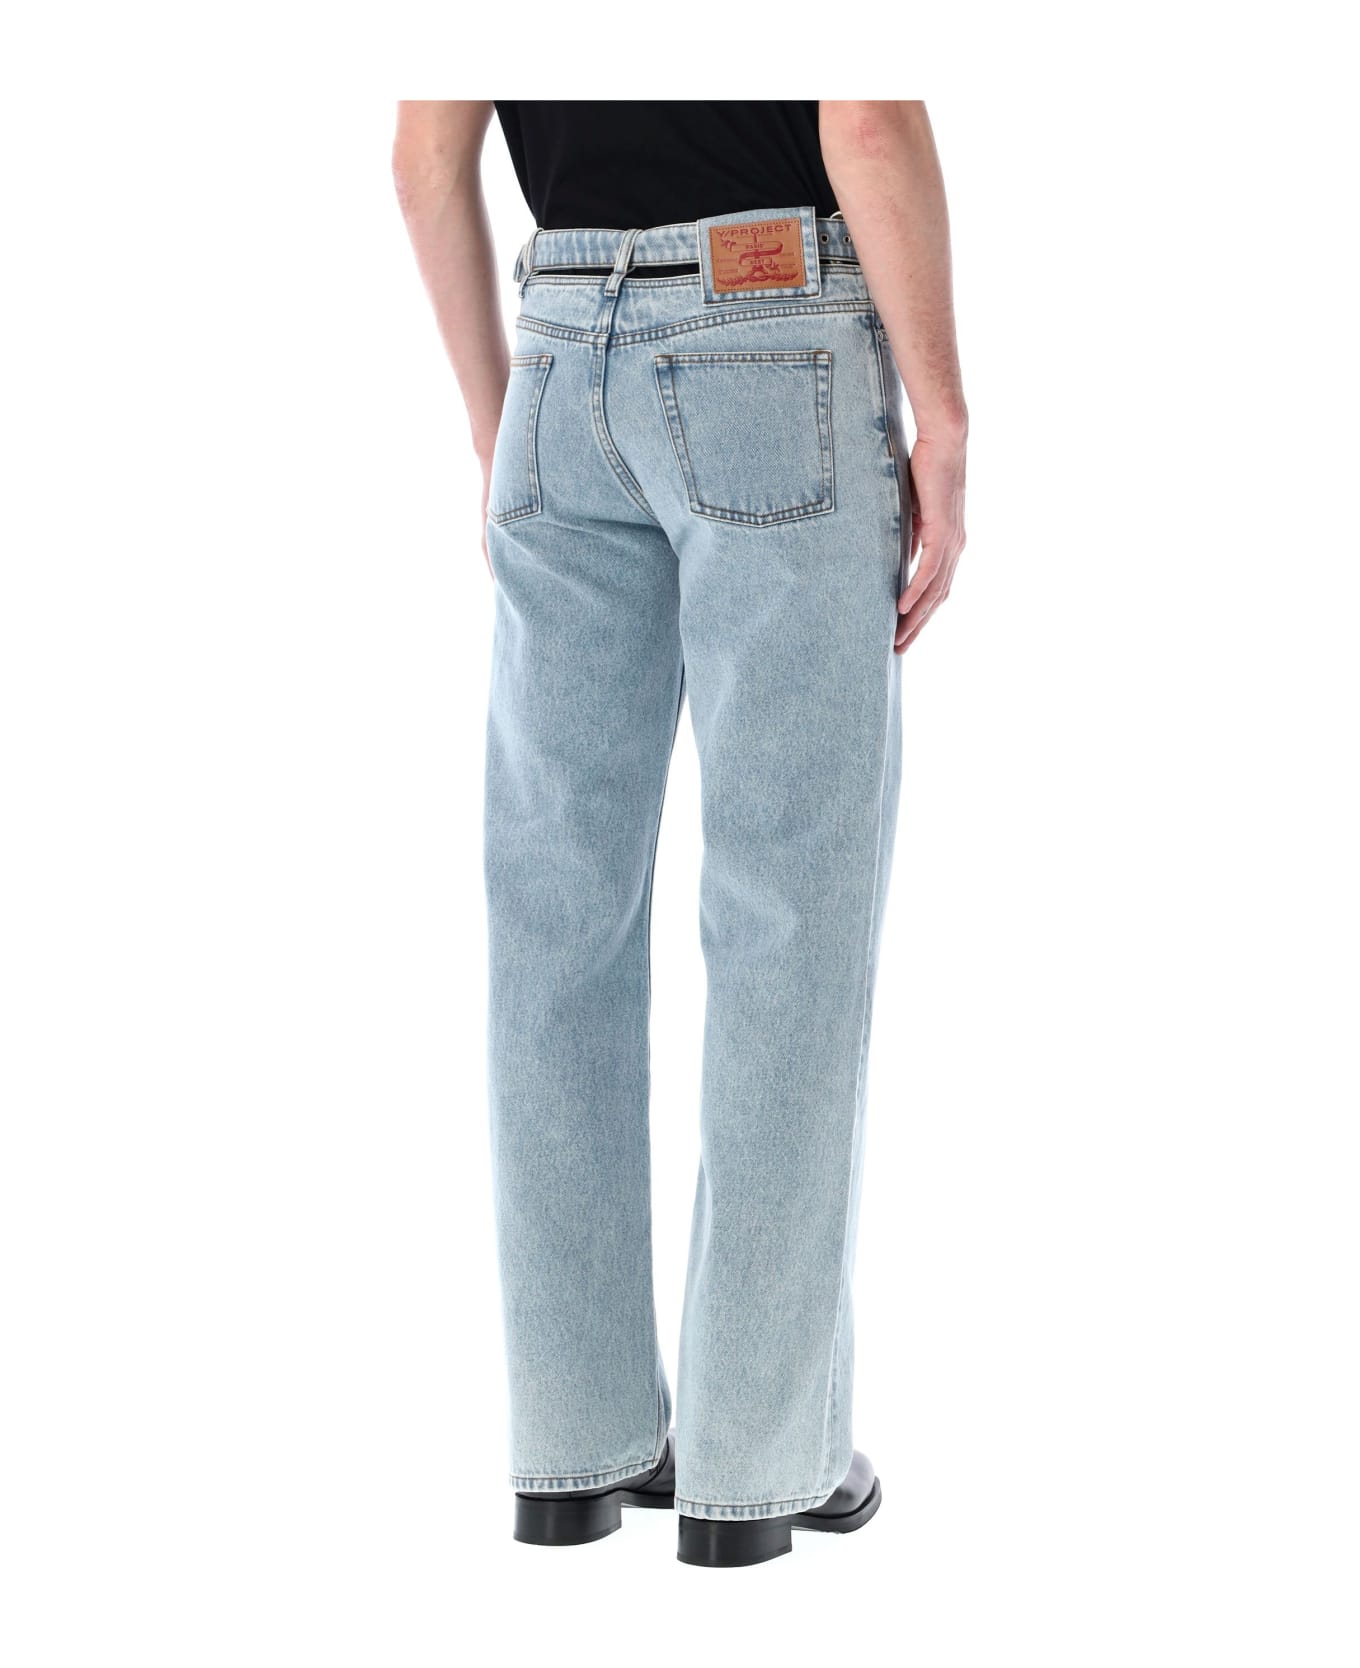 Y/Project Y Belt Jeans - EVERGREEN ICE BLUE